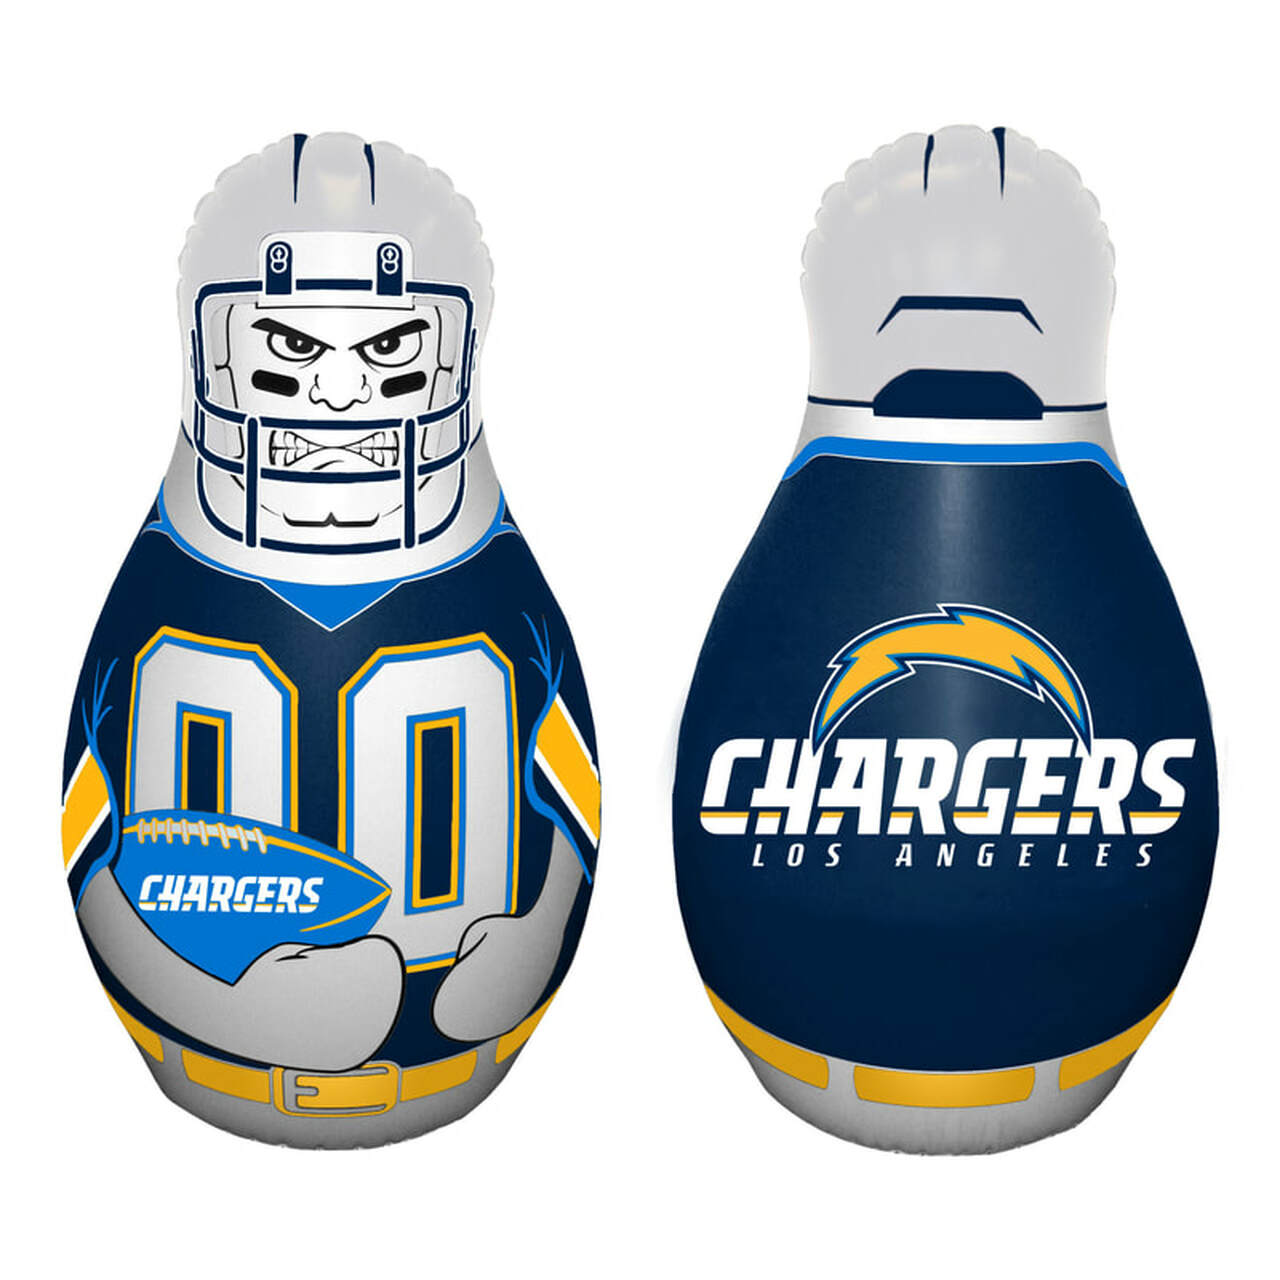 Los Angeles Chargers Tackle Buddy